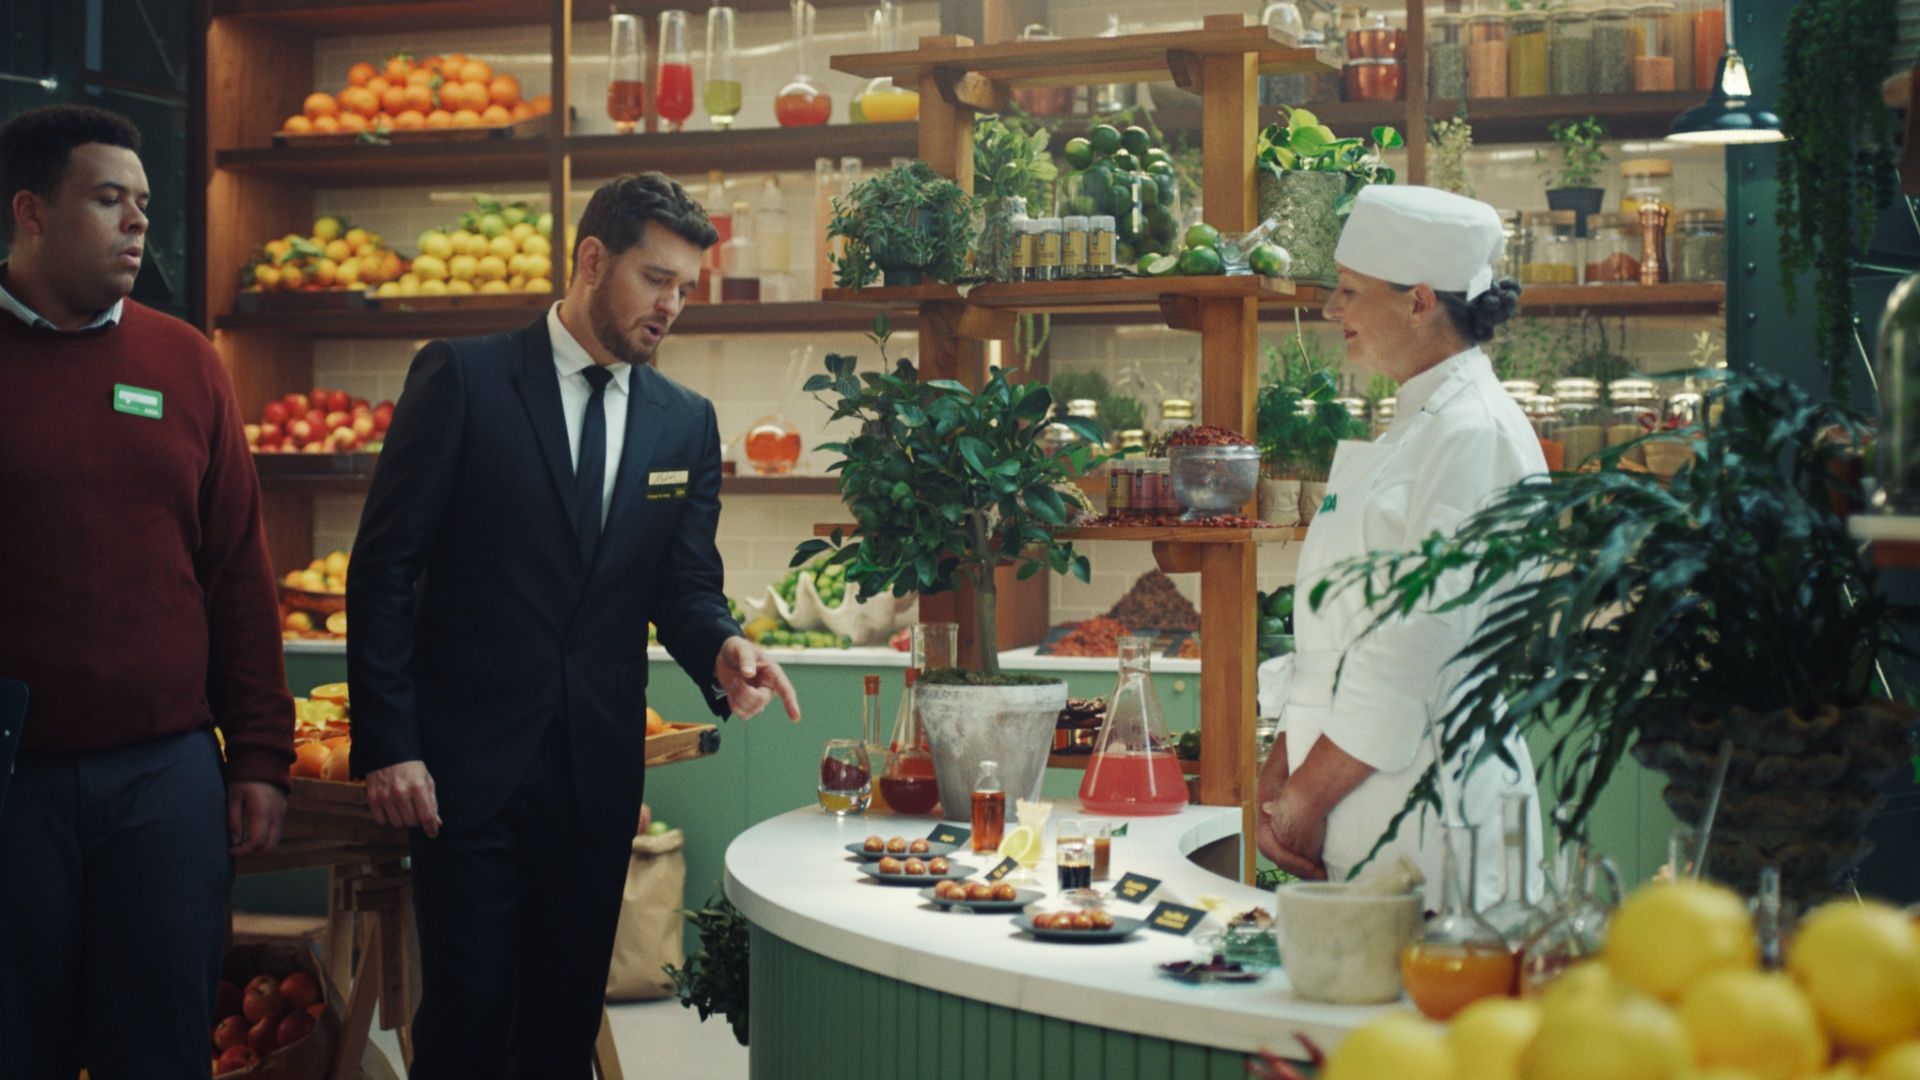 Asda’s 2023 Christmas advert, featuring Chief Quality Officer, Michael Buble.